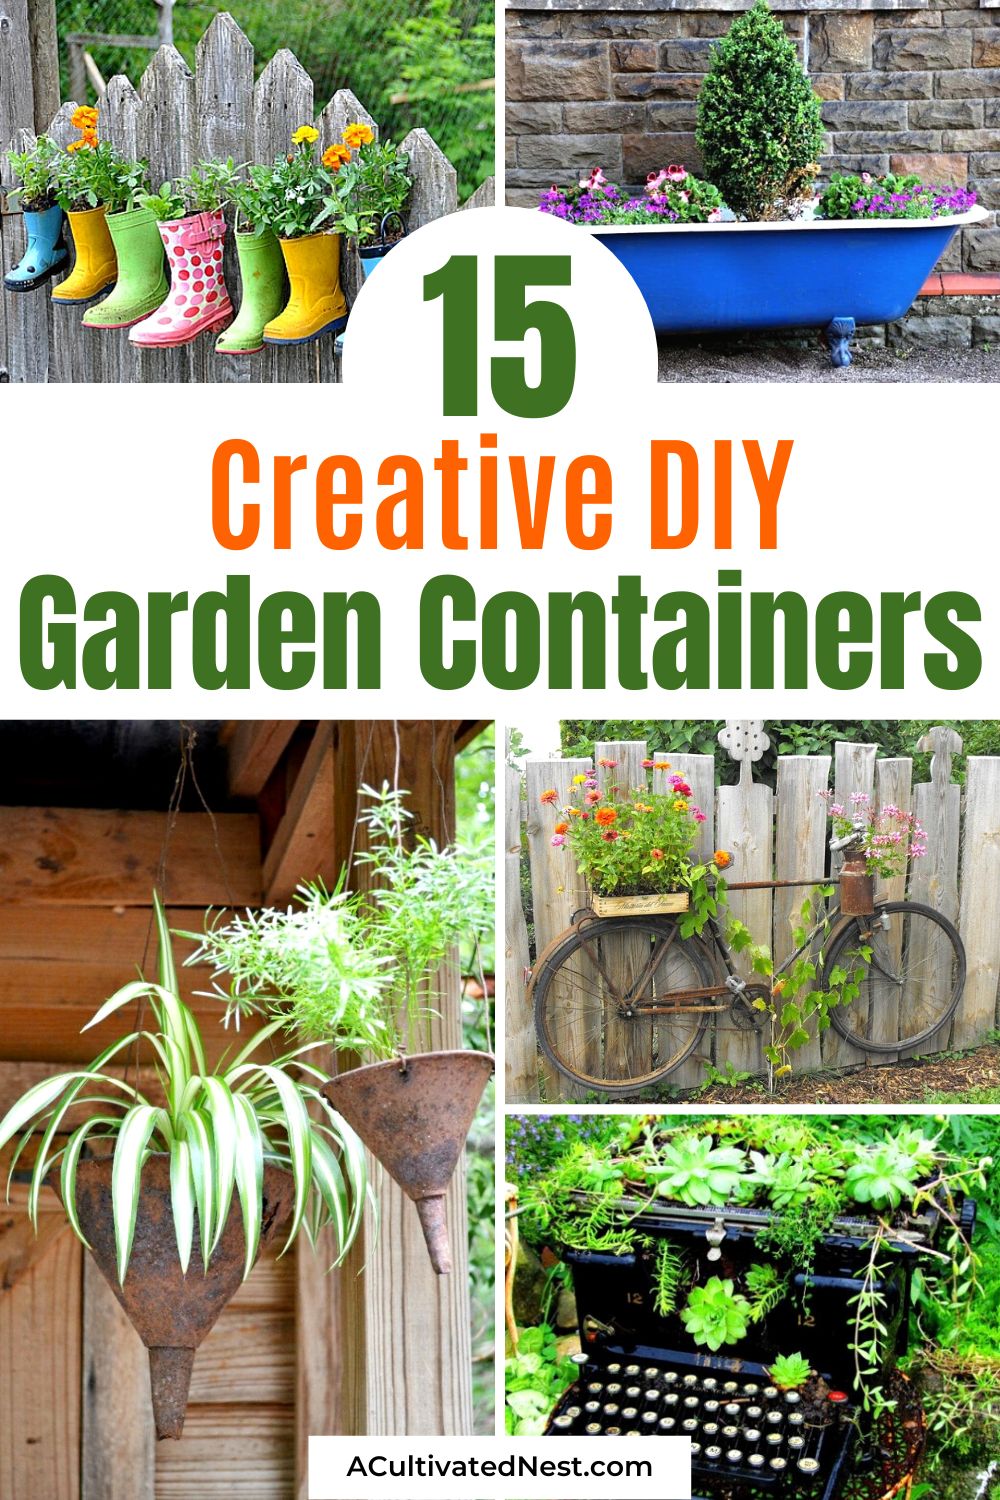 15 Creative DIY Garden Containers- Whether you're a seasoned gardener or a novice, you'll find something exciting to try from this roundup of creative DIY garden containers. Don't miss out on transforming your outdoor haven into a botanical wonderland! | #garden #upcycle #repurpose #diyIdeas #ACultivatedNest